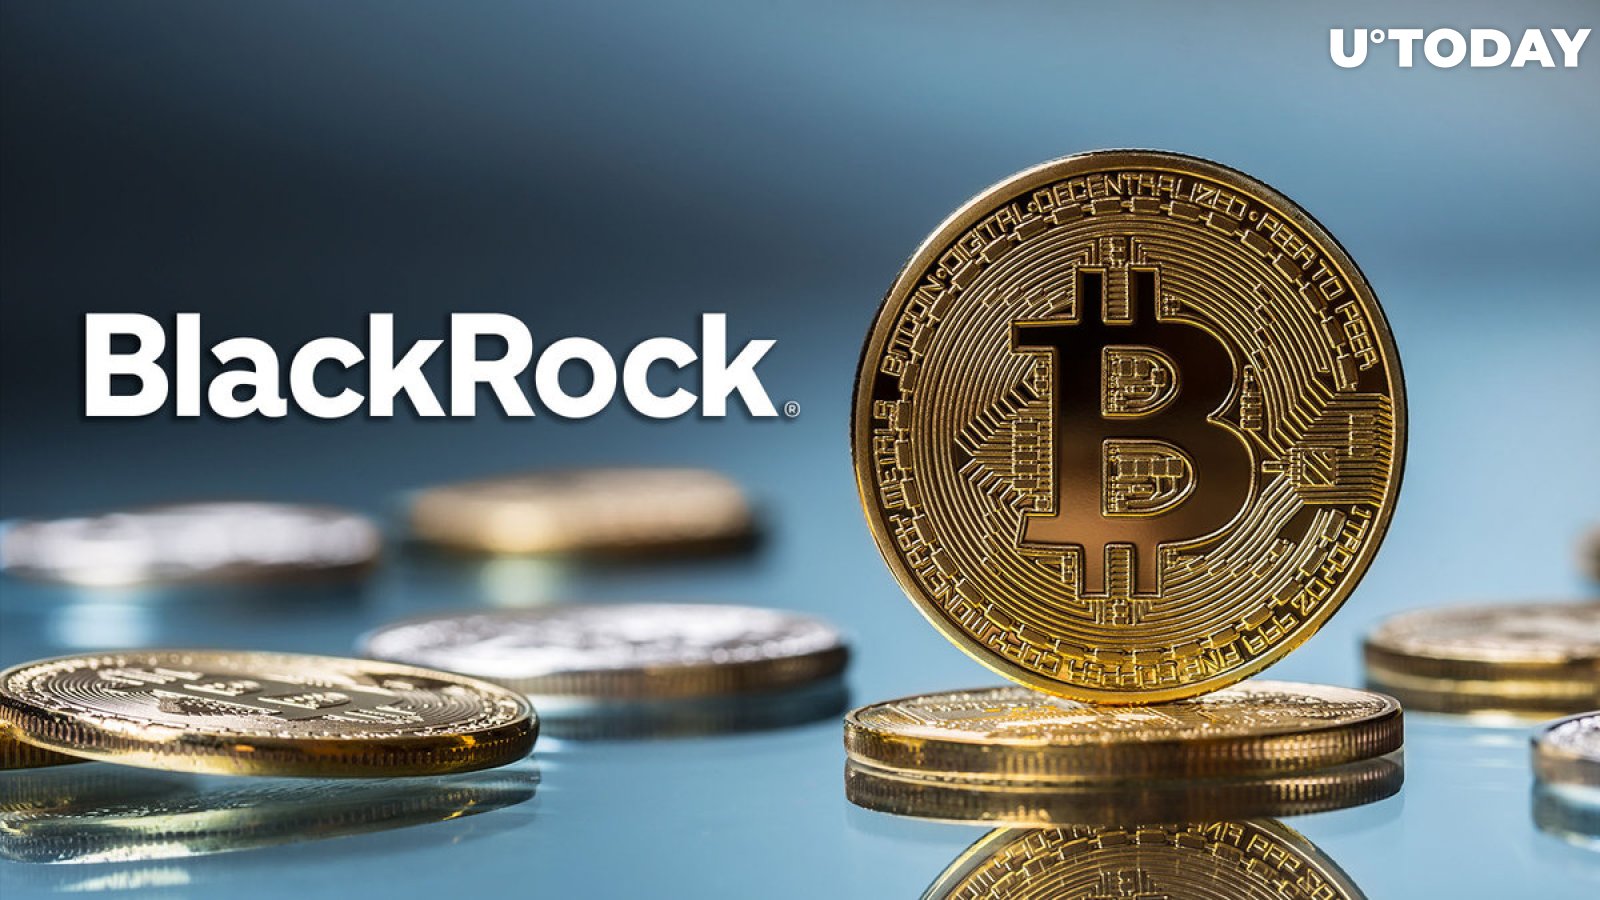 BlackRock's Updated Bitcoin (BTC) Holdings Uncovered, Hold on Tight